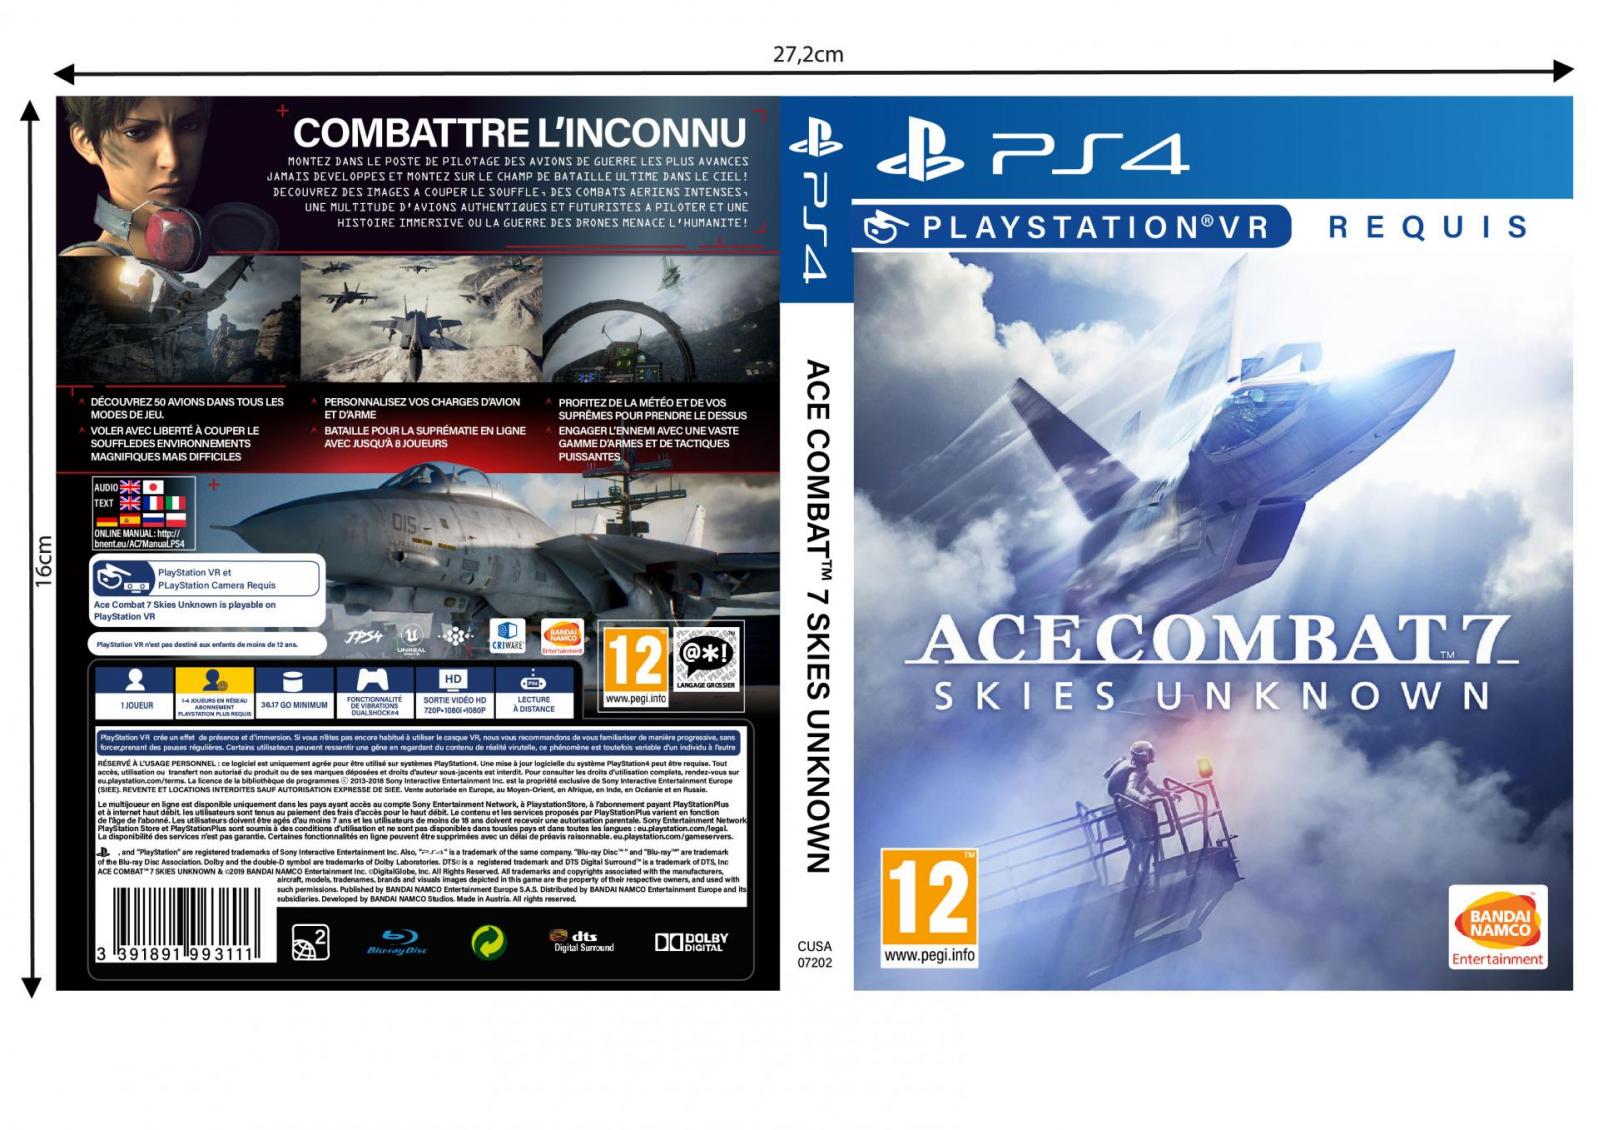 Ace combat 7 skies unknown